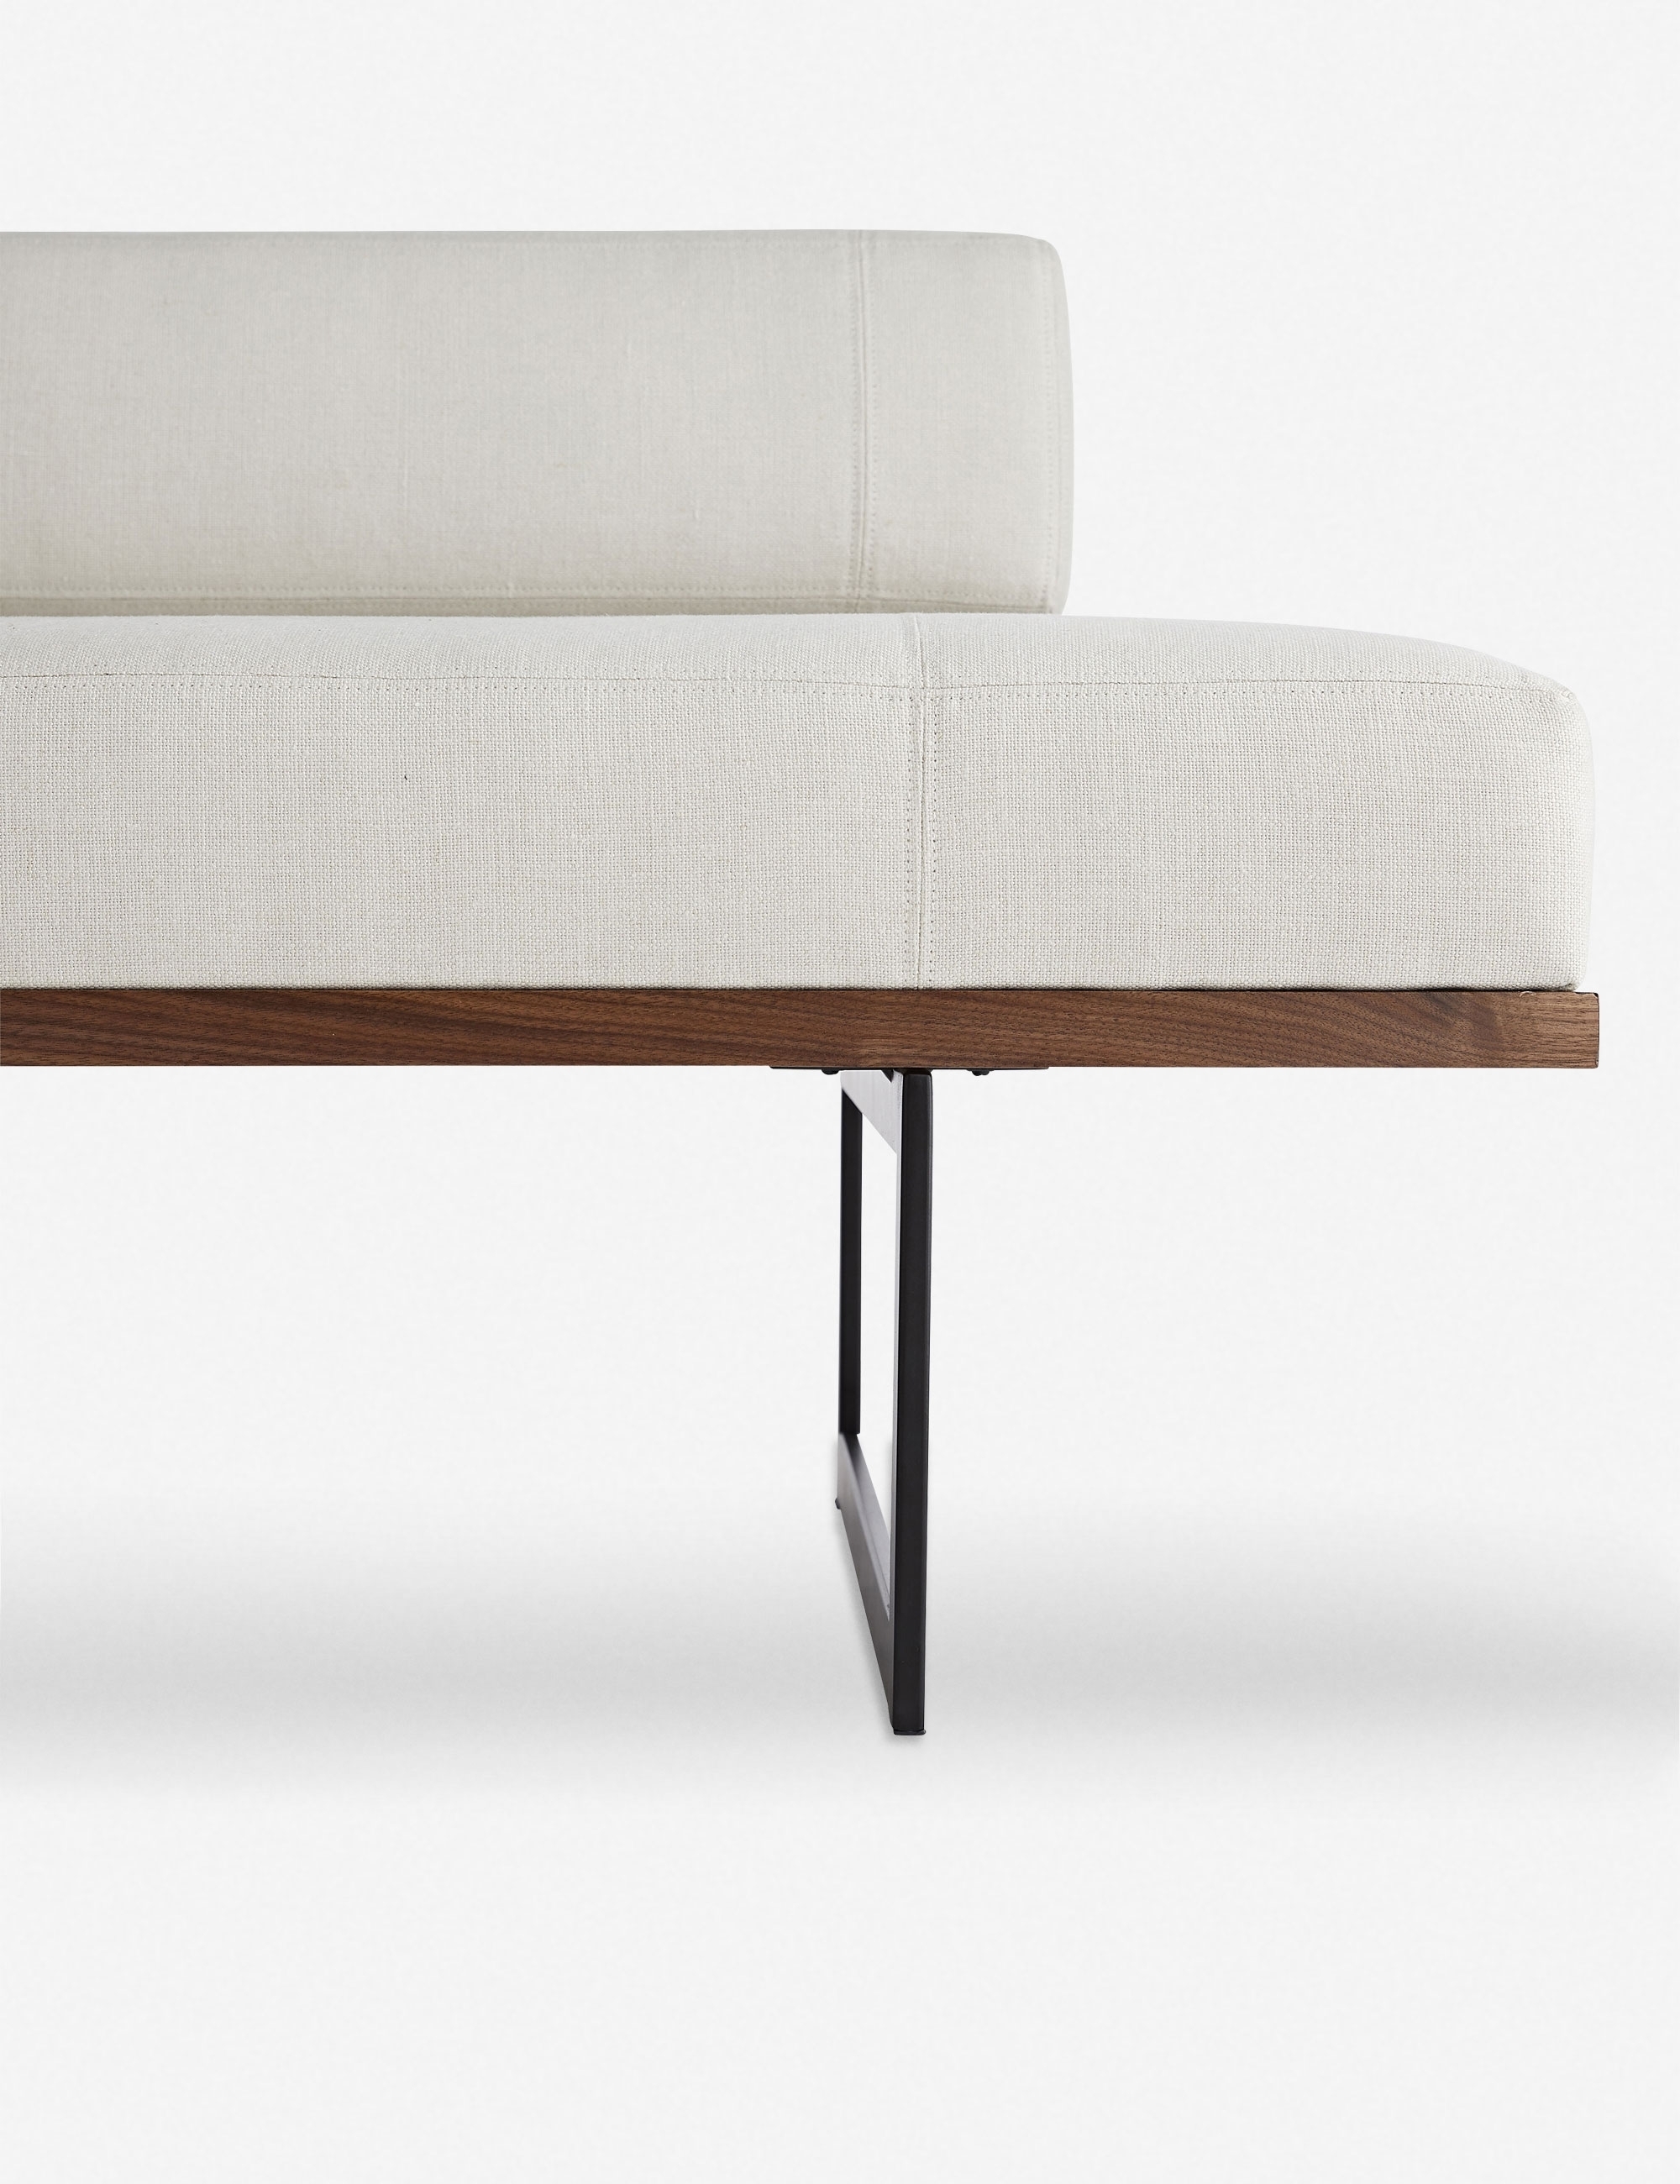 Tuck Bench by Arteriors - Image 1